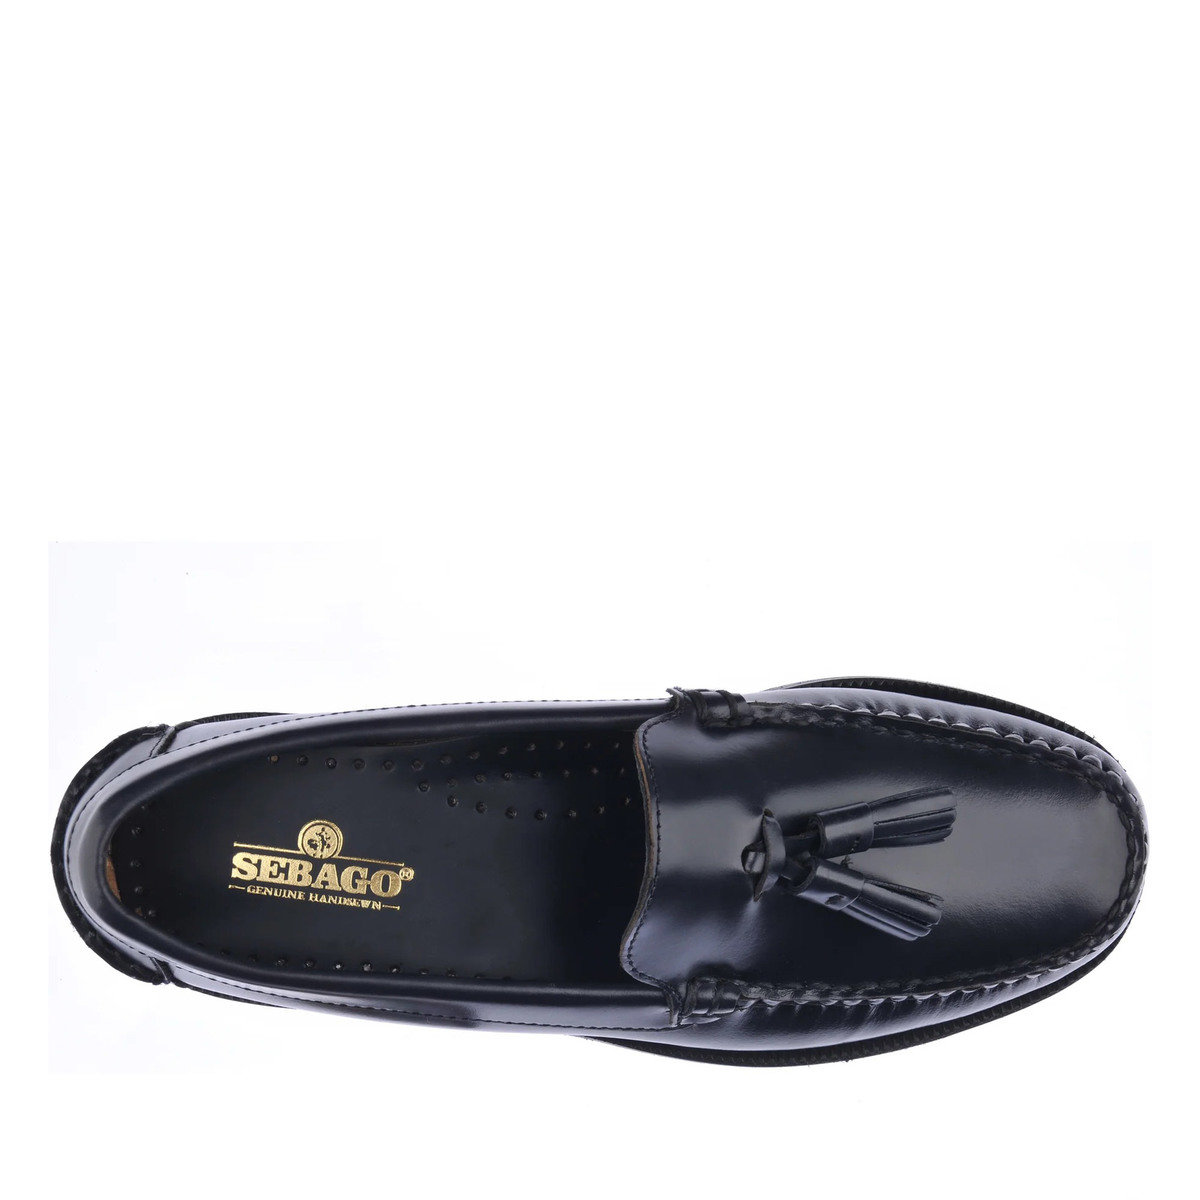 Womens Classic Will Loafer